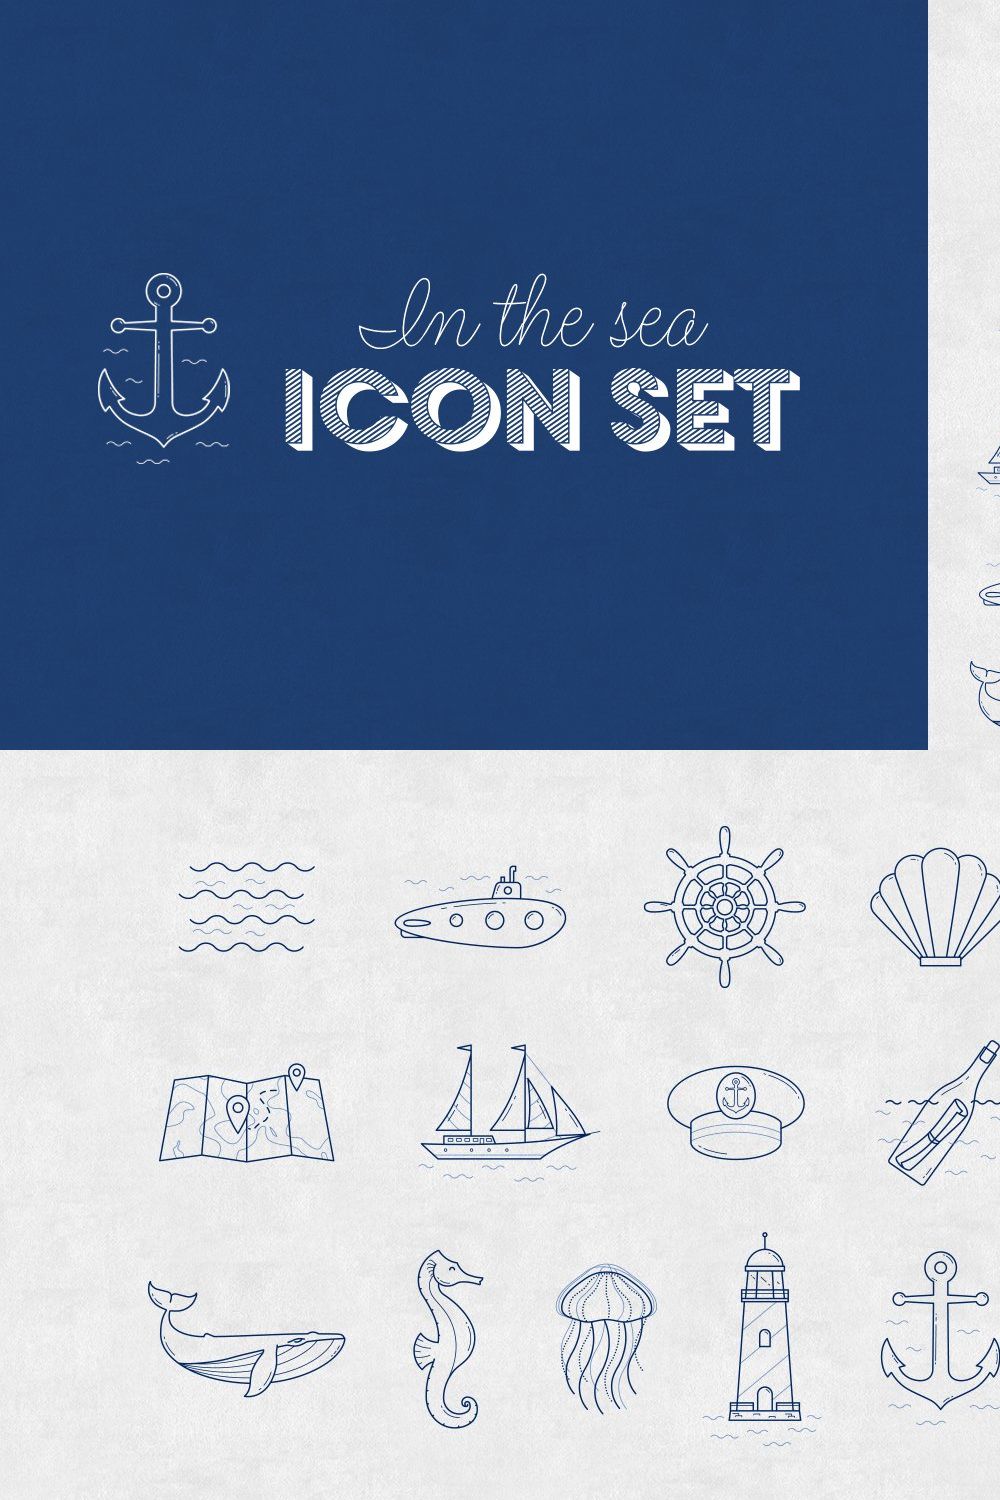 In the sea - vector linear icon set pinterest preview image.